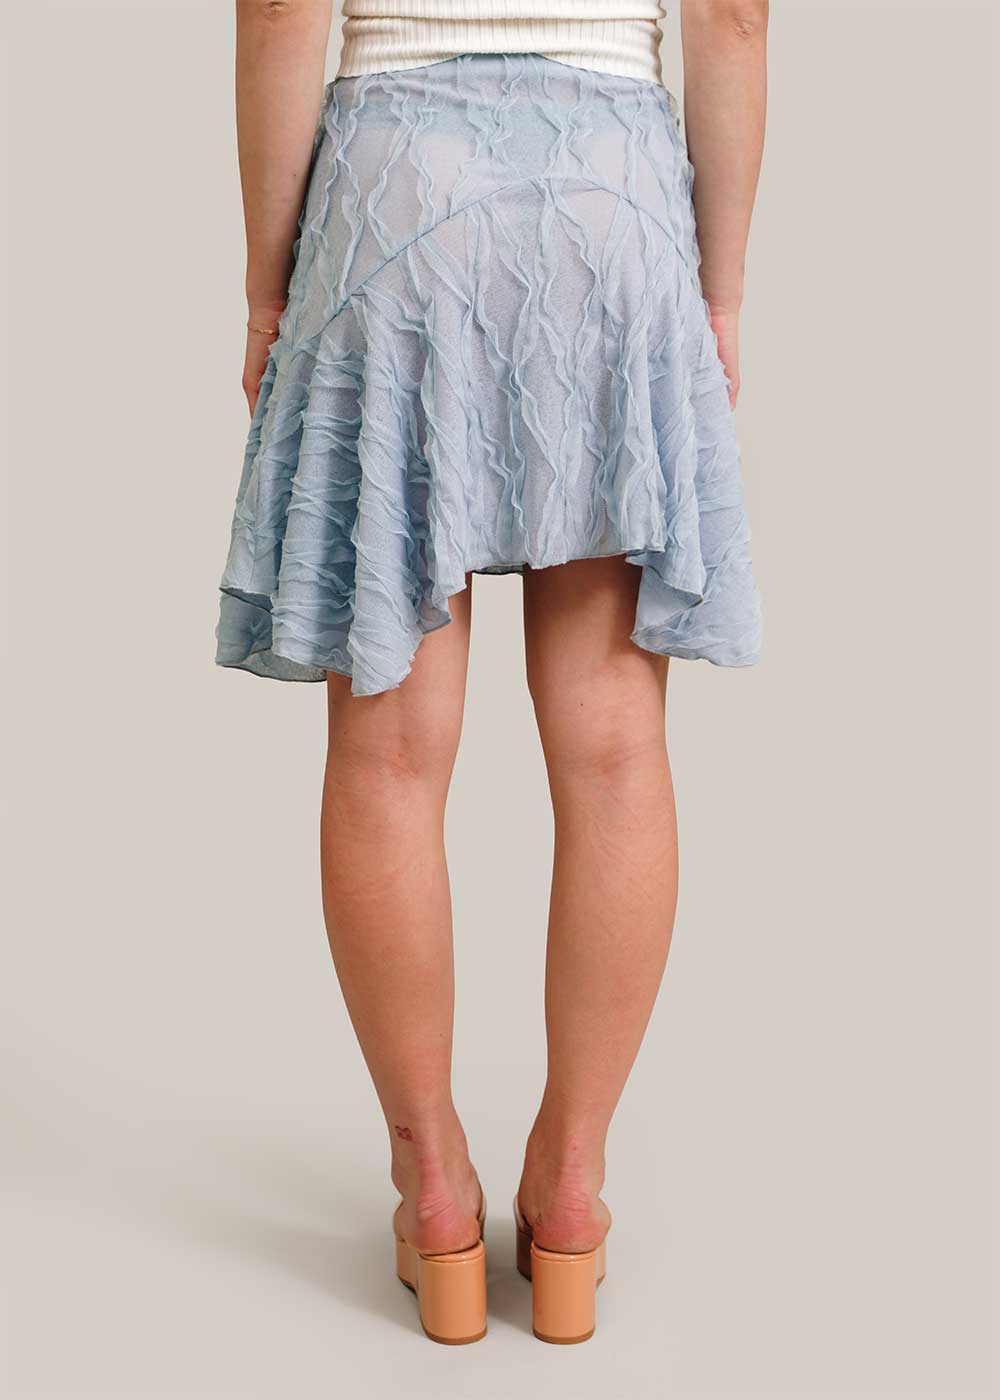 Geel Sky Blue Carrie Skirt - New Classics Studios Sustainable Ethical Fashion Canada